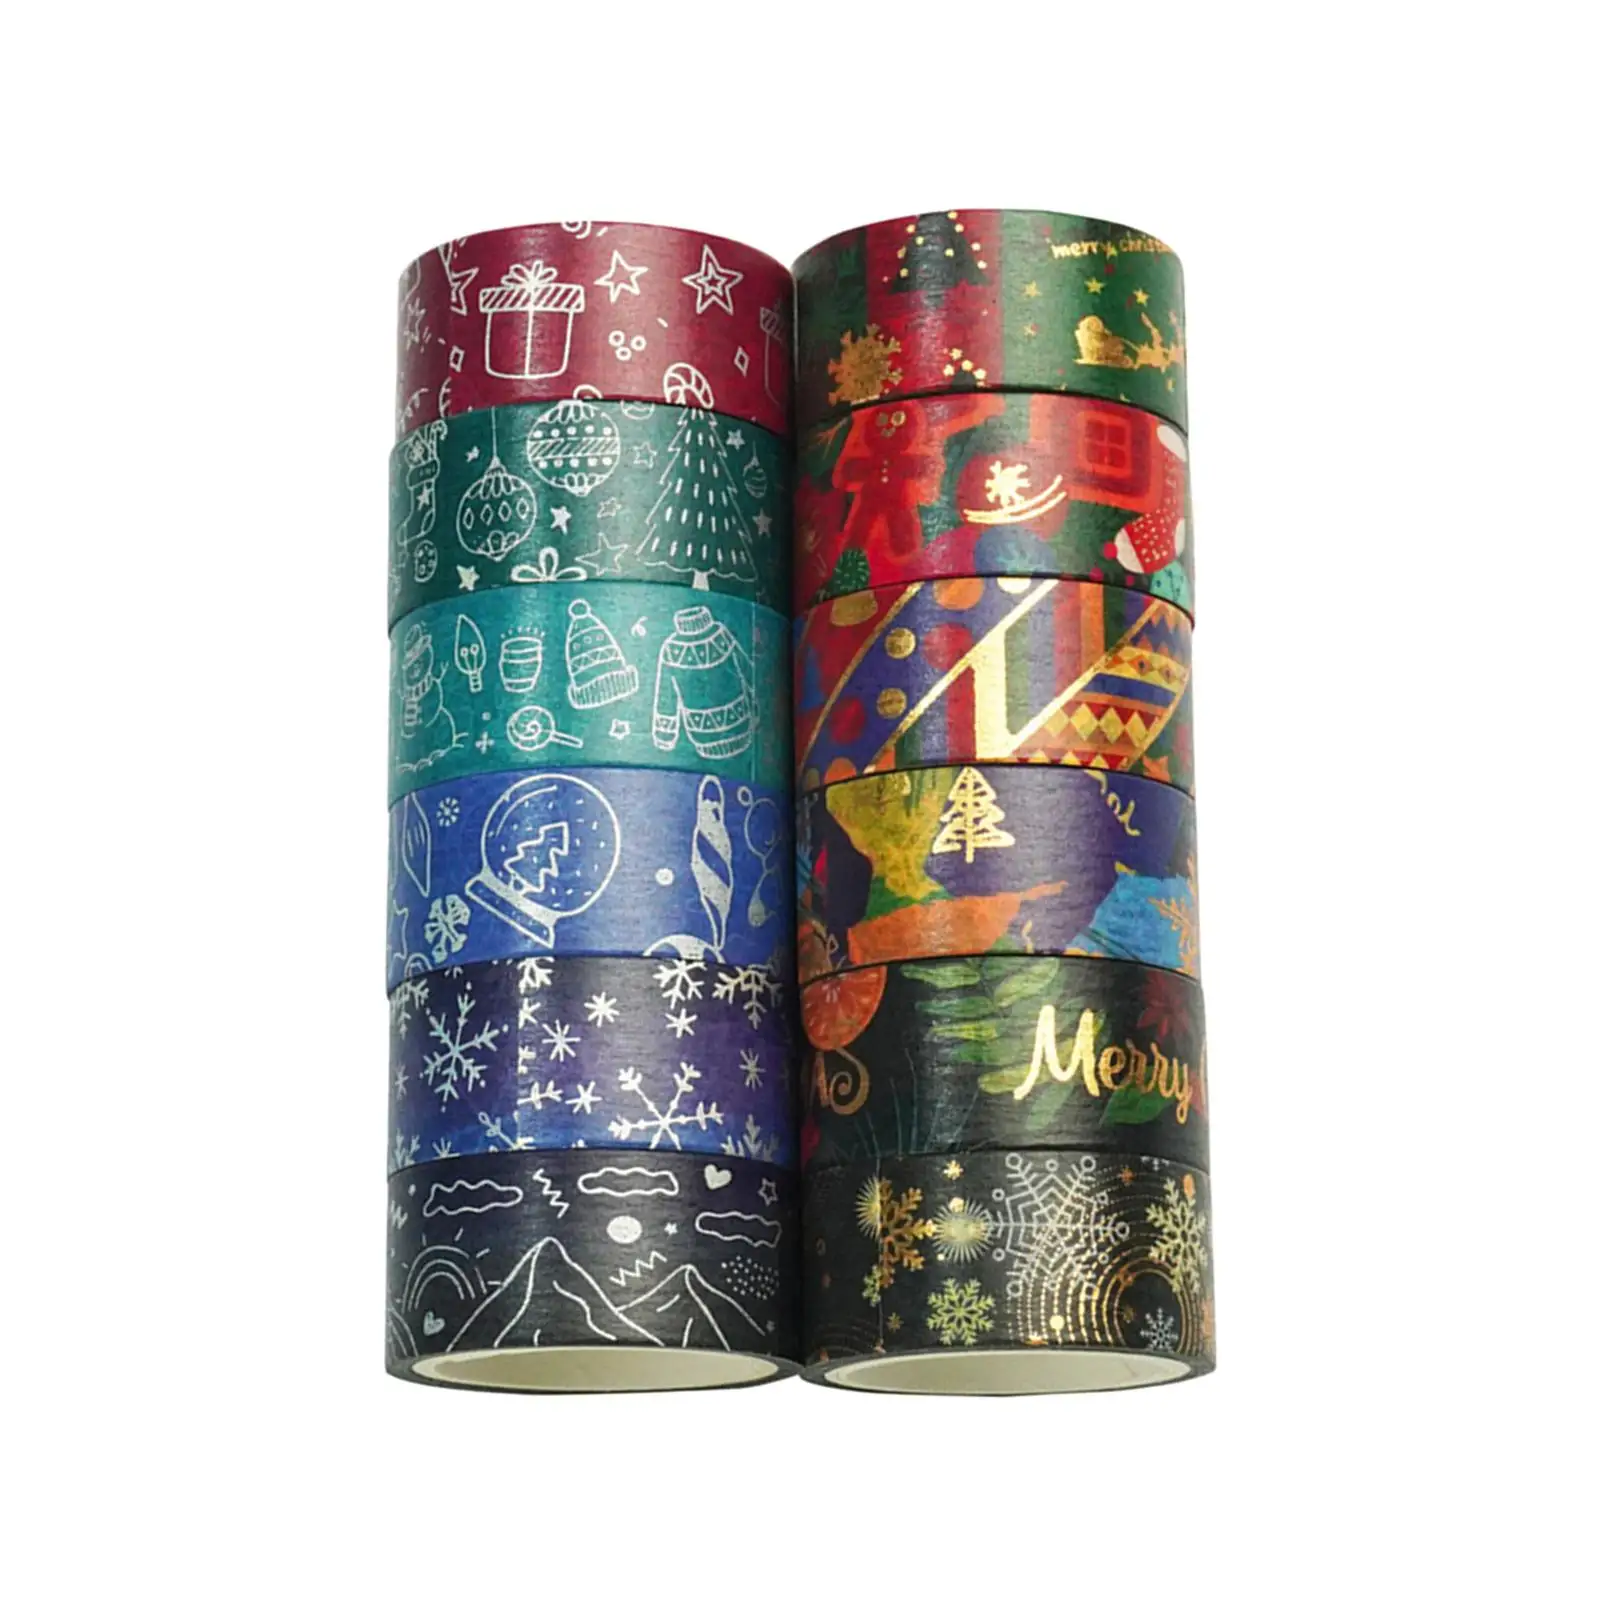 12 Pieces Christmas Washi Tape Set Paper Masking Tape for Gift Packaging